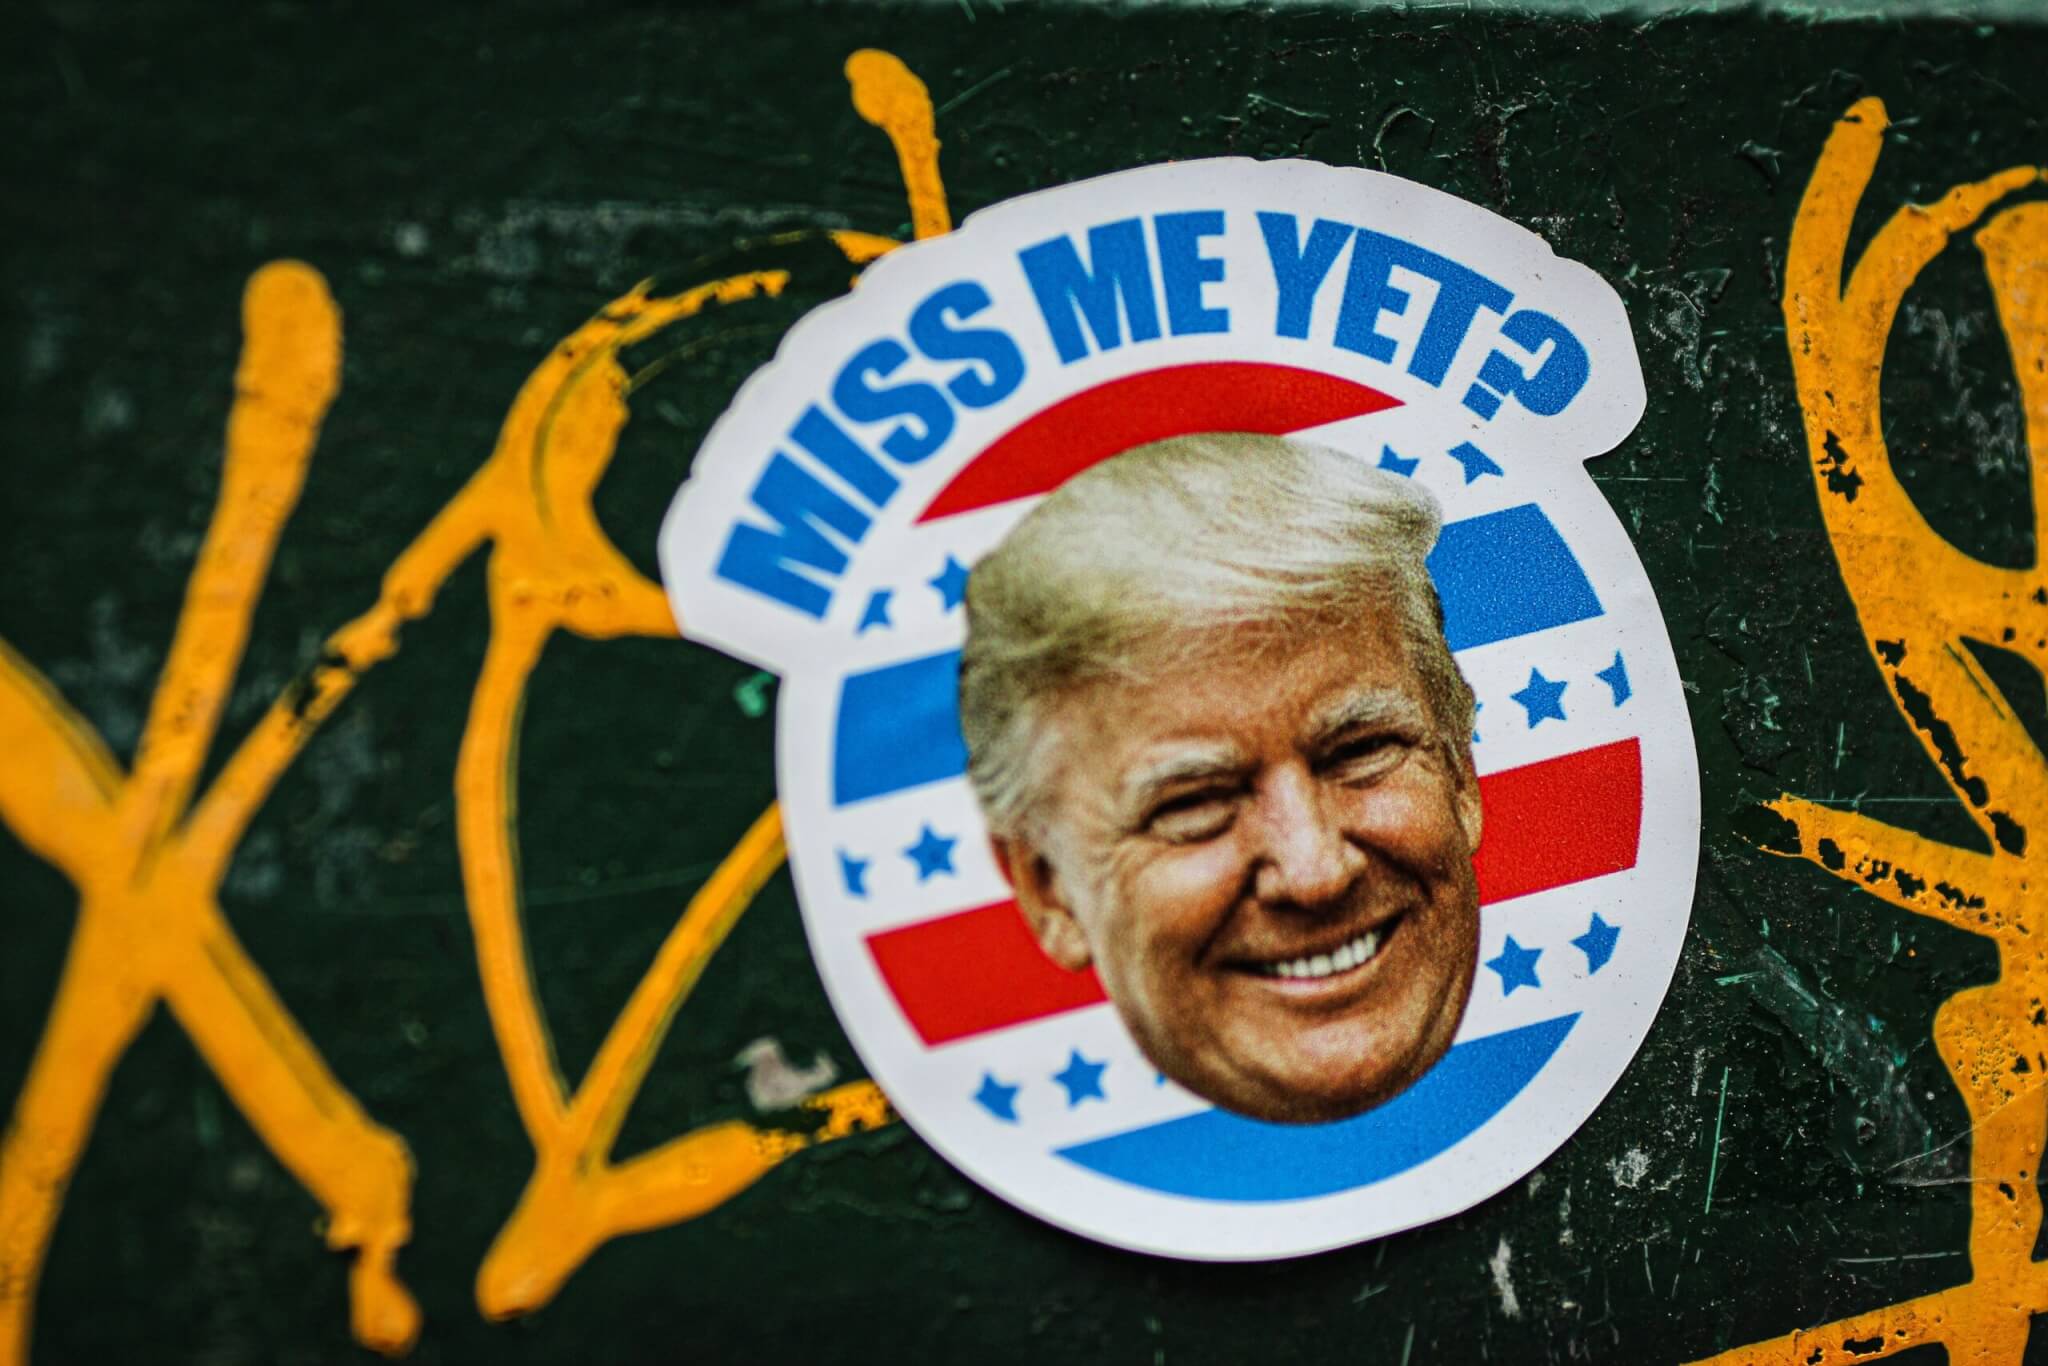 Donald Trump sticker that says "Miss Me Yet?"